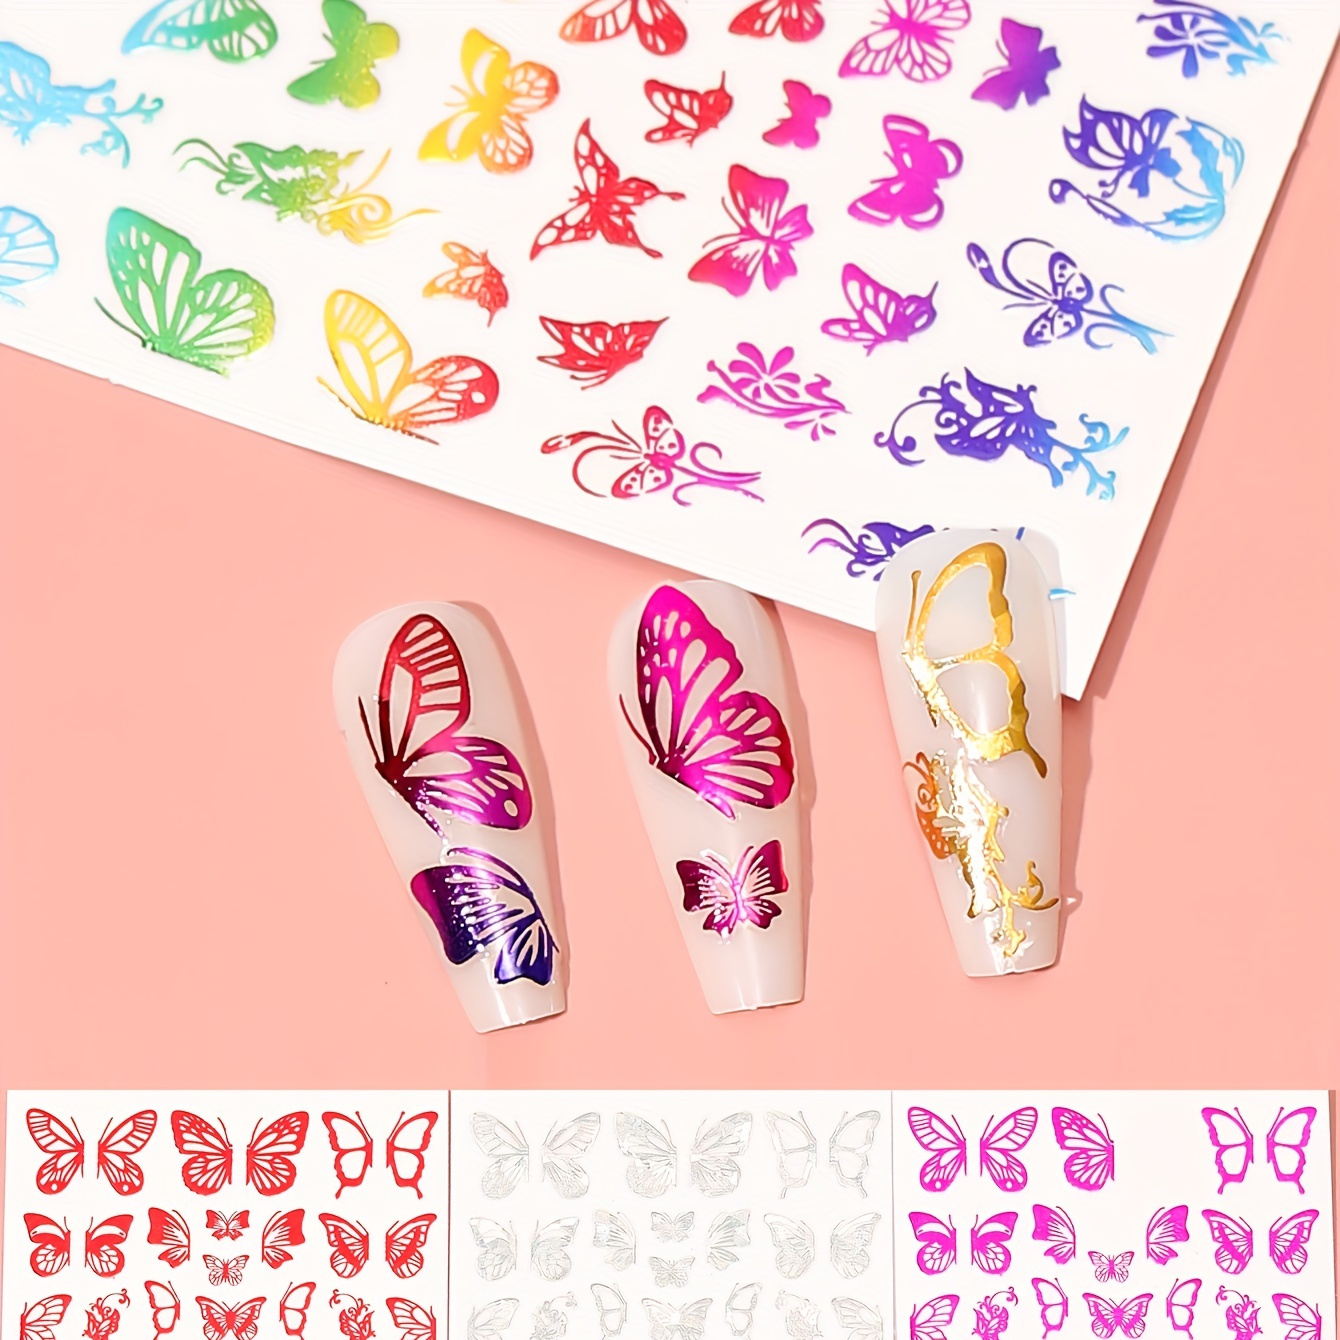 

5pcs Holographic 3d Butterfly Nail Art Stickers, Adhesive Sliders, Colorful Diy Golden Nail Transfer Decals, Foils Wraps Decorations